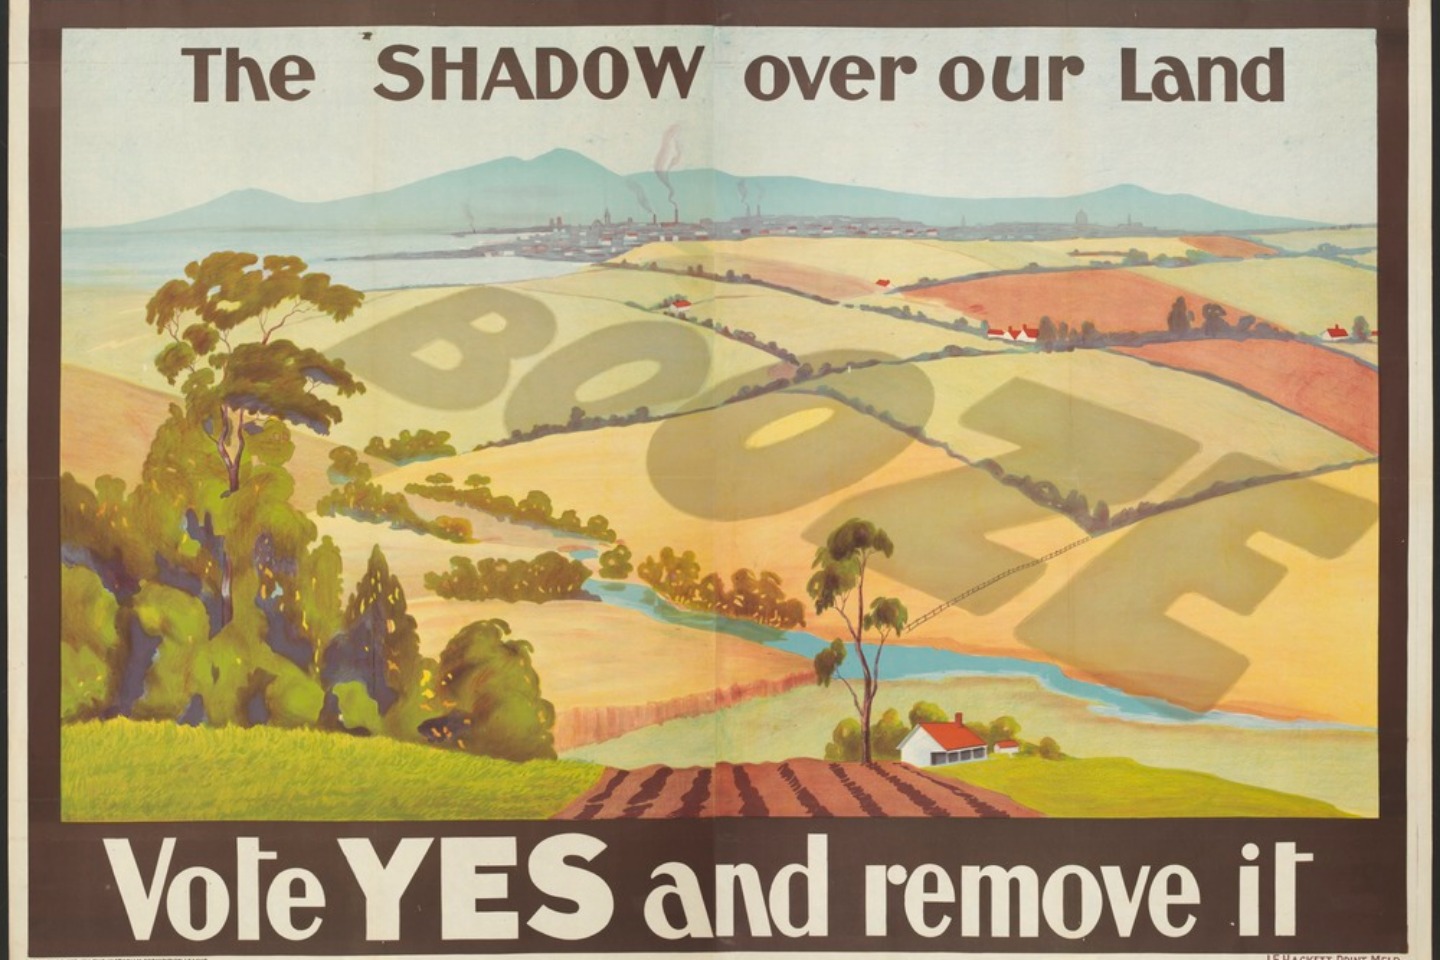 Poster from 1930 campaign